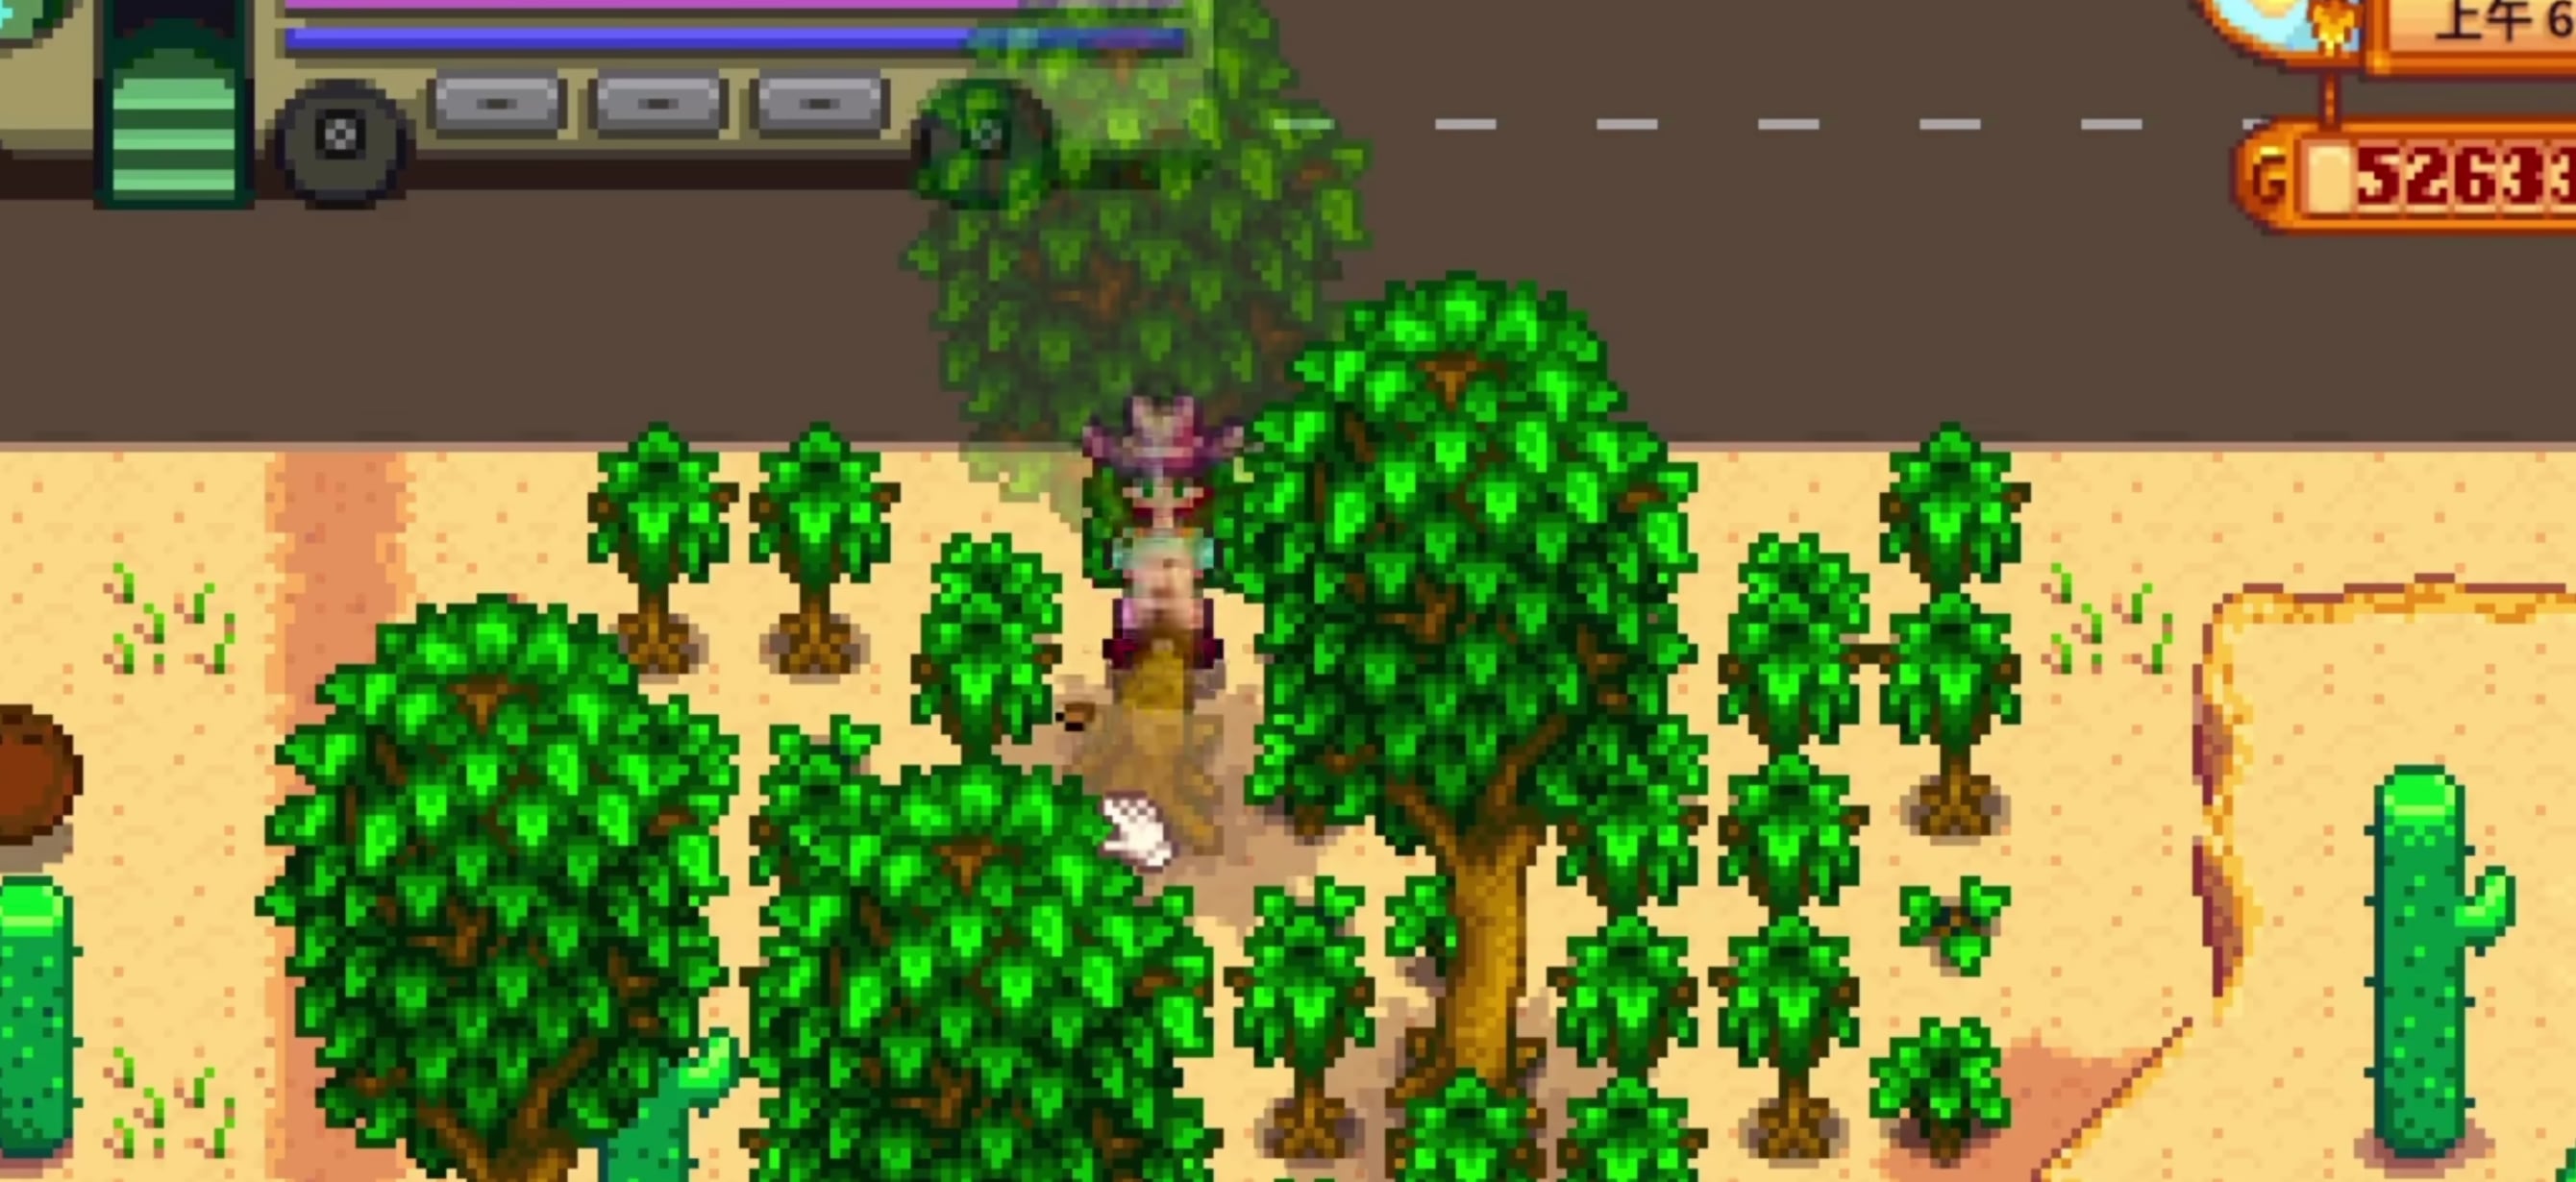 Planting trees in Stardew Valley